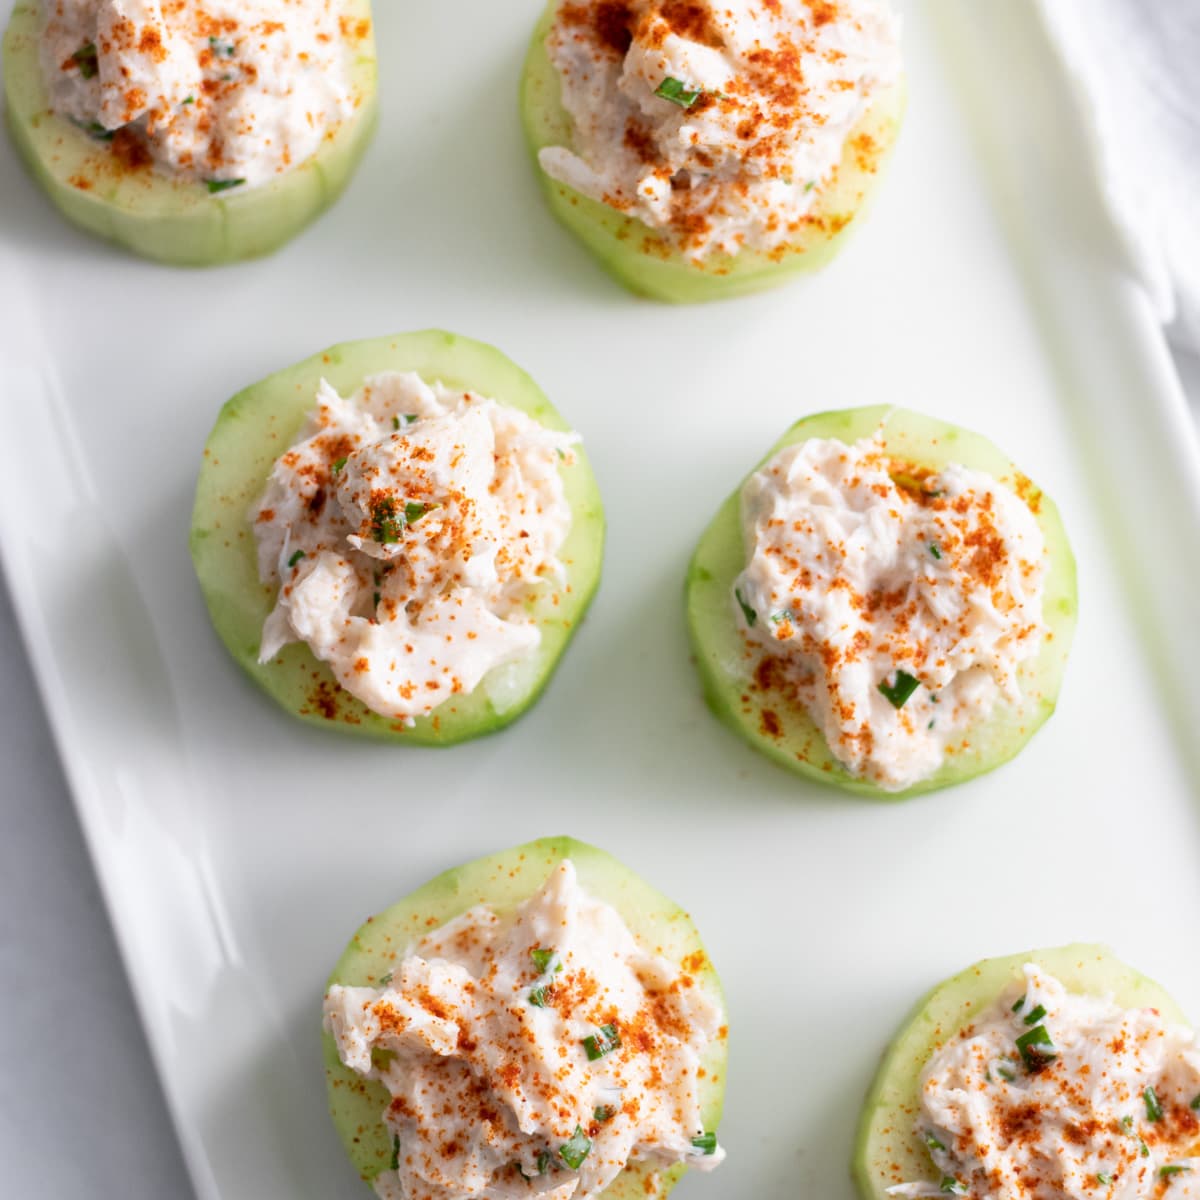 Cups made from cucumbers and stuffed with a crab mixture on a rectangular plate